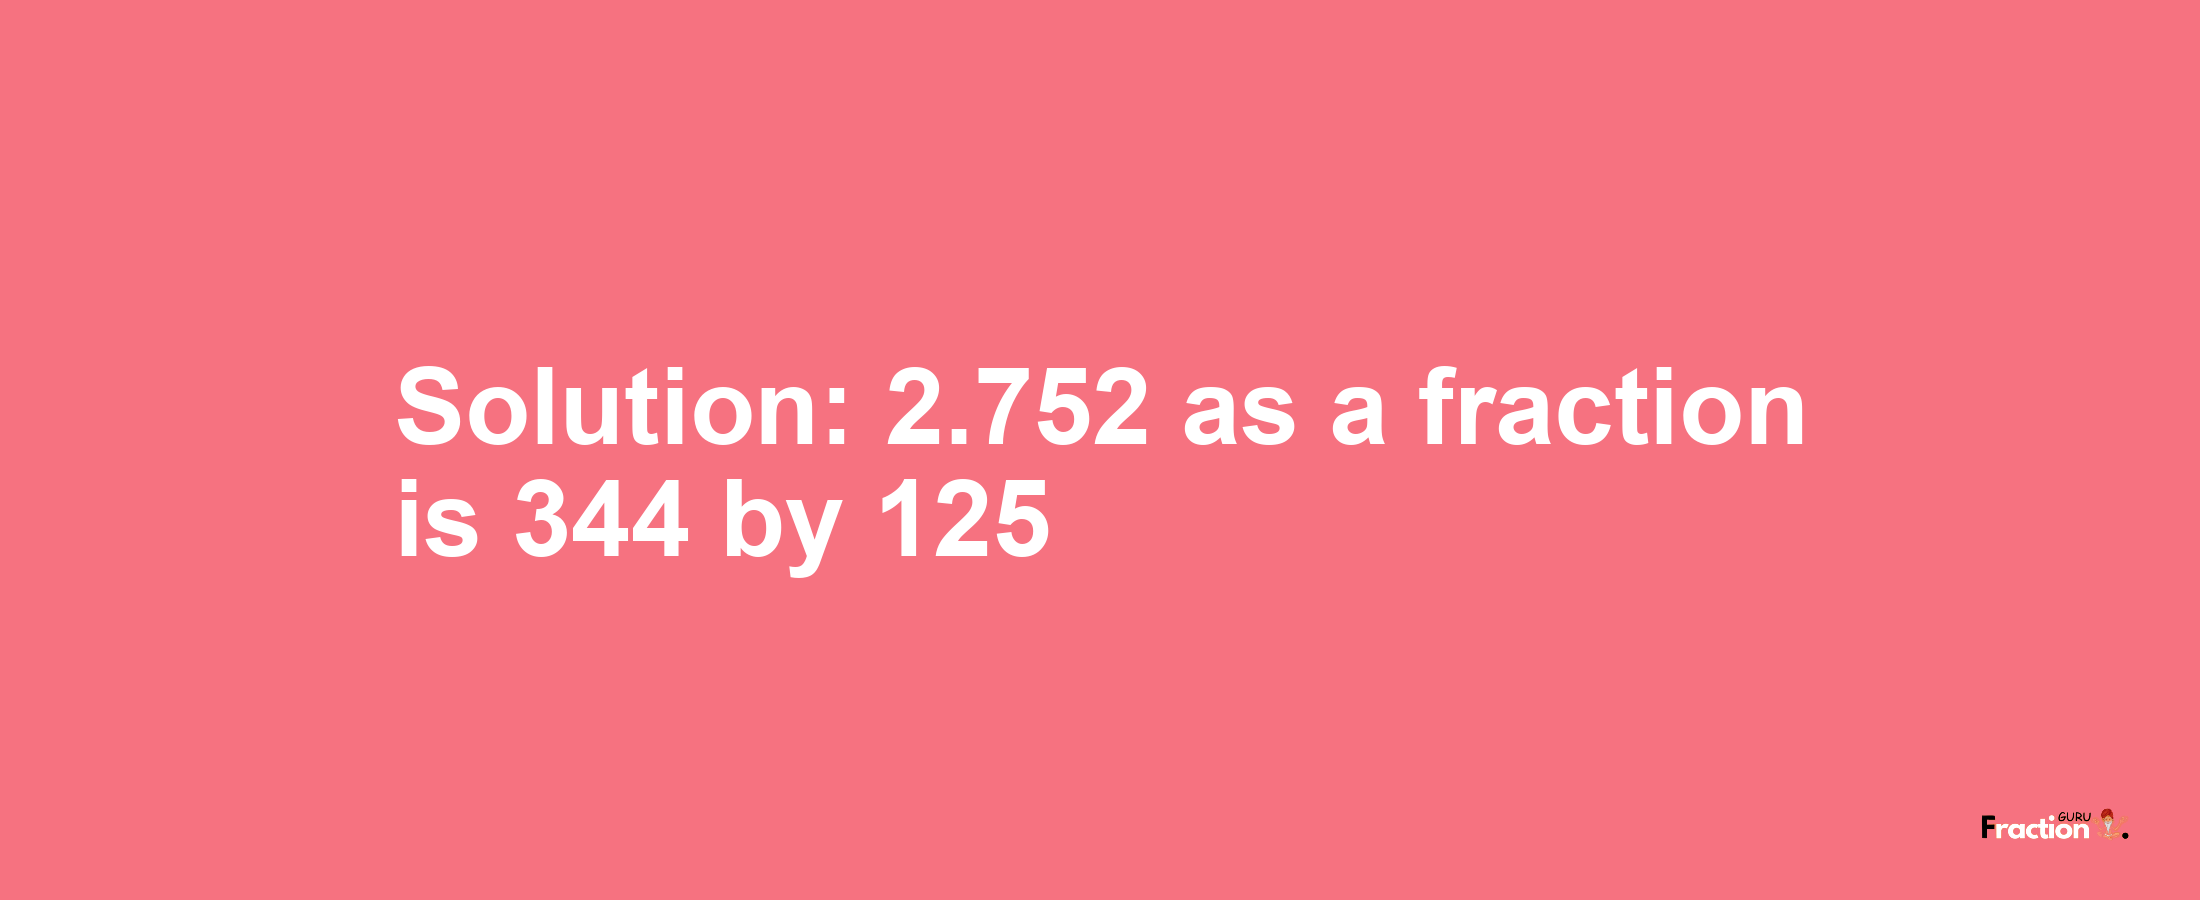 Solution:2.752 as a fraction is 344/125